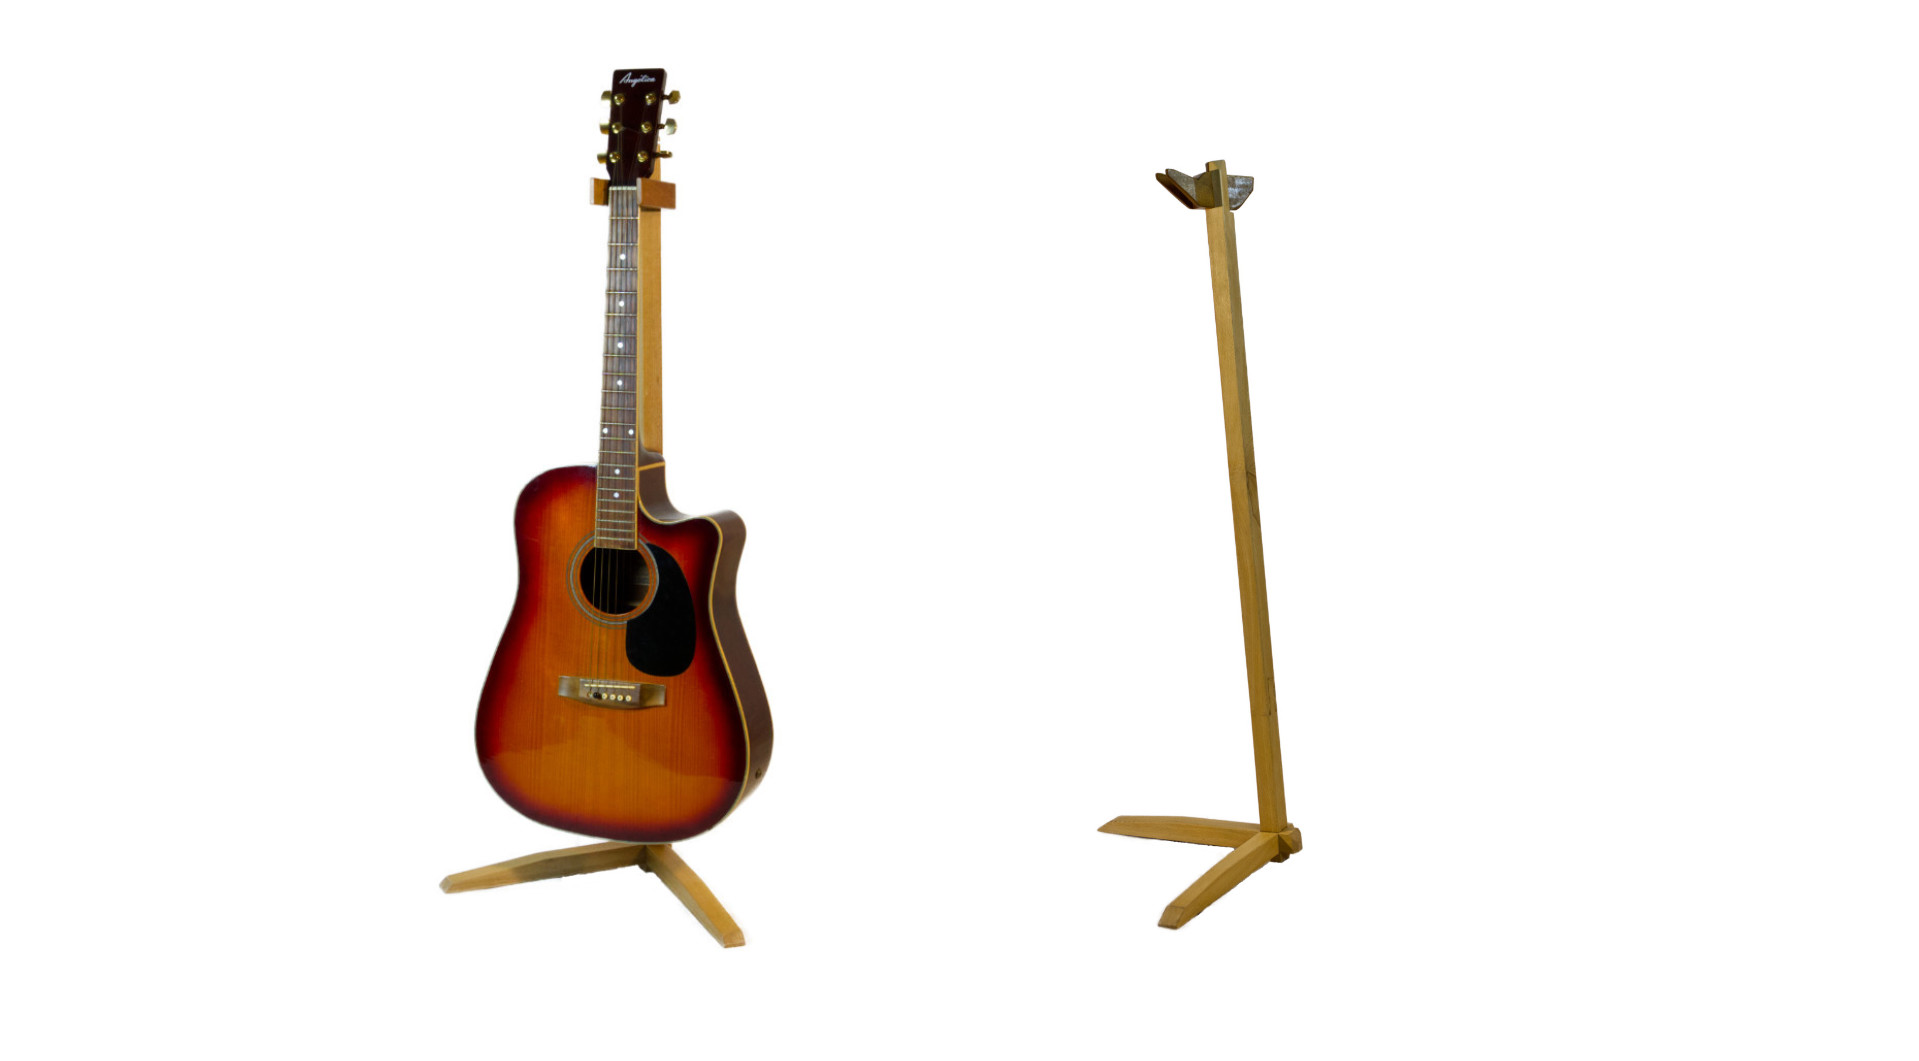 https://www.fugadiagonale.it/images/progetti/77/Guitar-Stand-intro-1.jpg